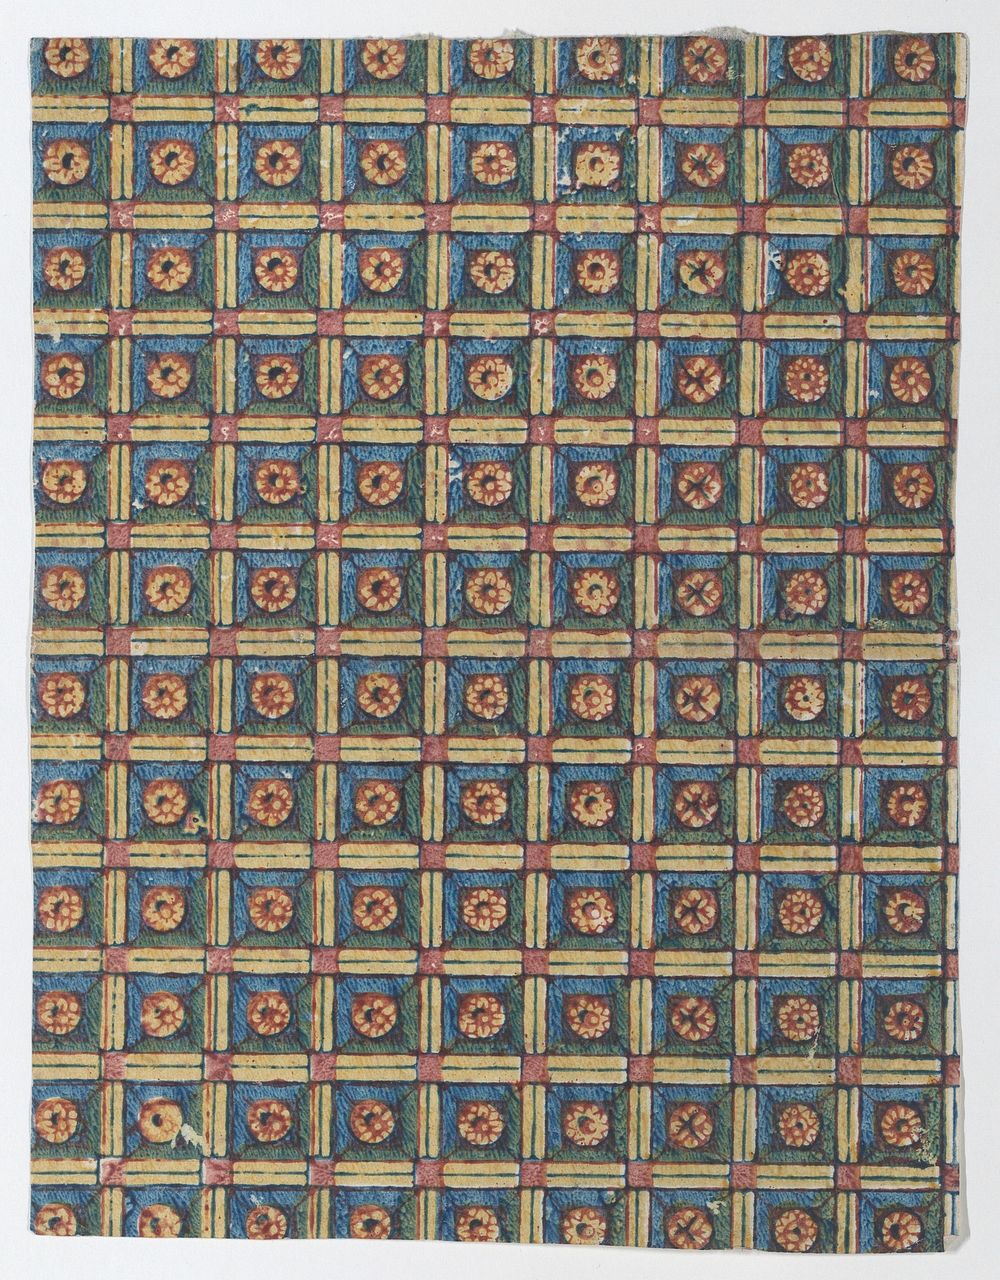 Sheet with overall geometric pattern with rosettes